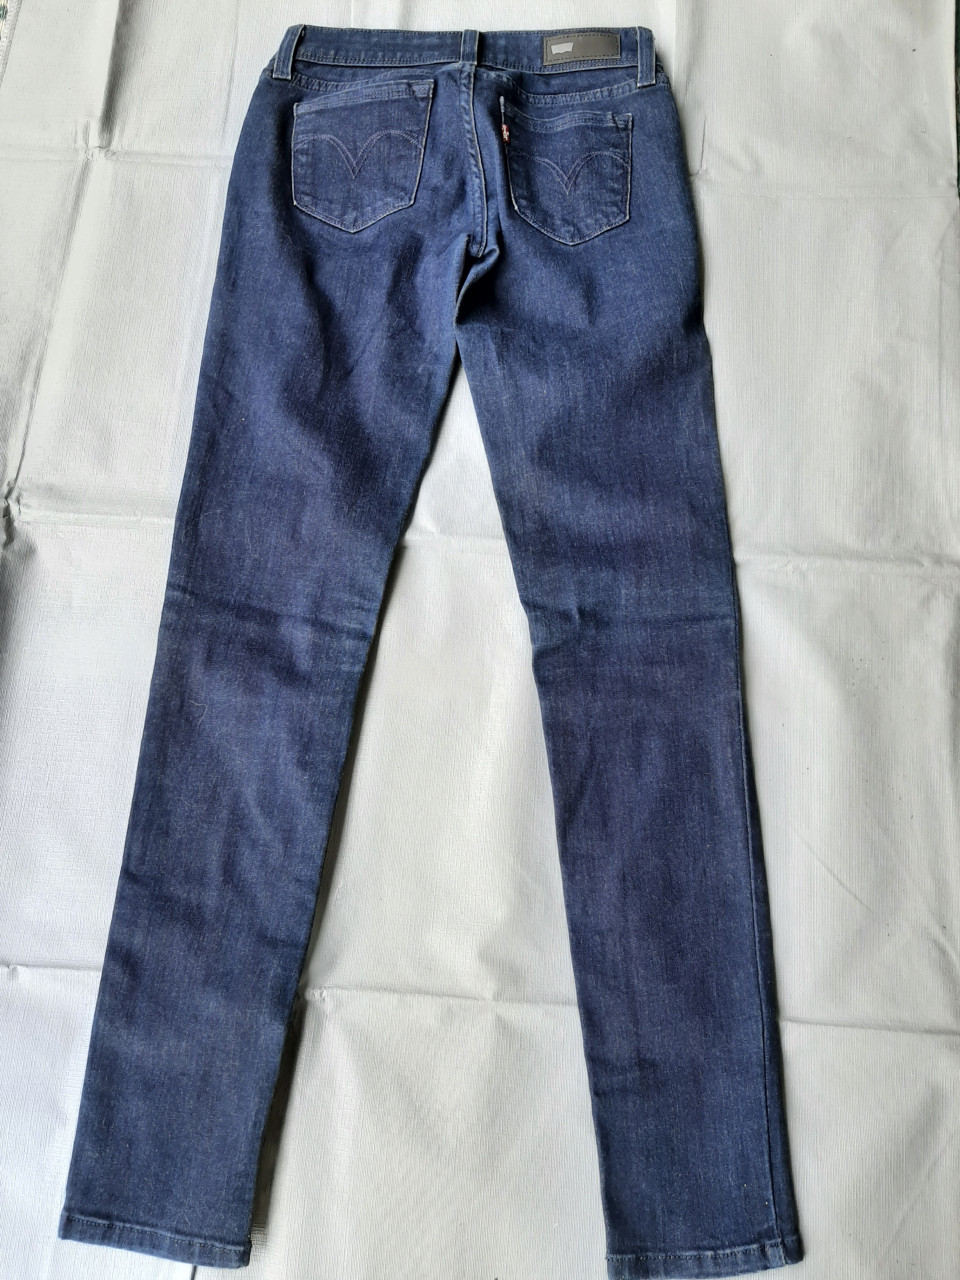 Levi's 24/32 low rise skinny jeans. Z.g.a.n